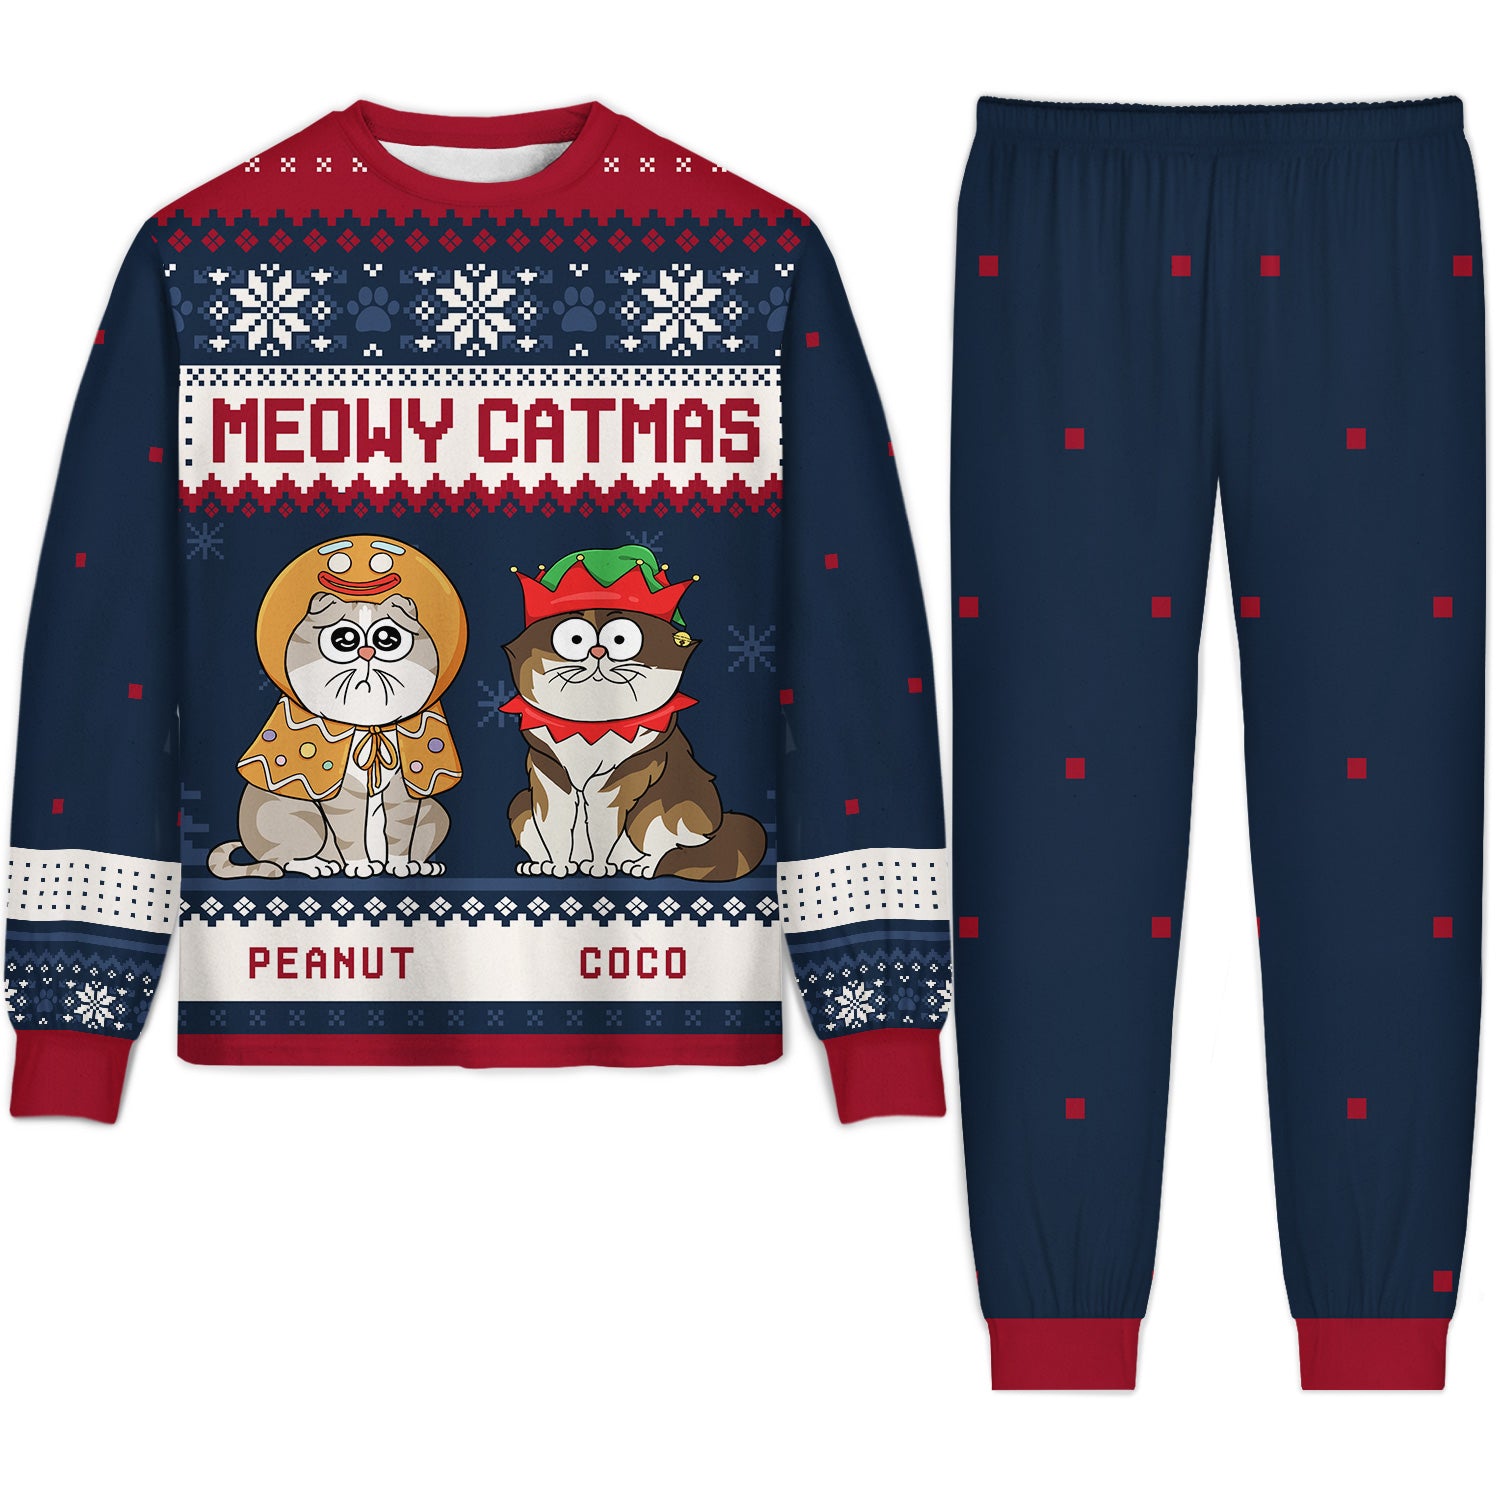 Meowy Catmas Funny Cartoon Cats - Christmas Gift For Cat Lovers, Cat Moms, Cat Dads - Personalized Unisex Pajamas Set